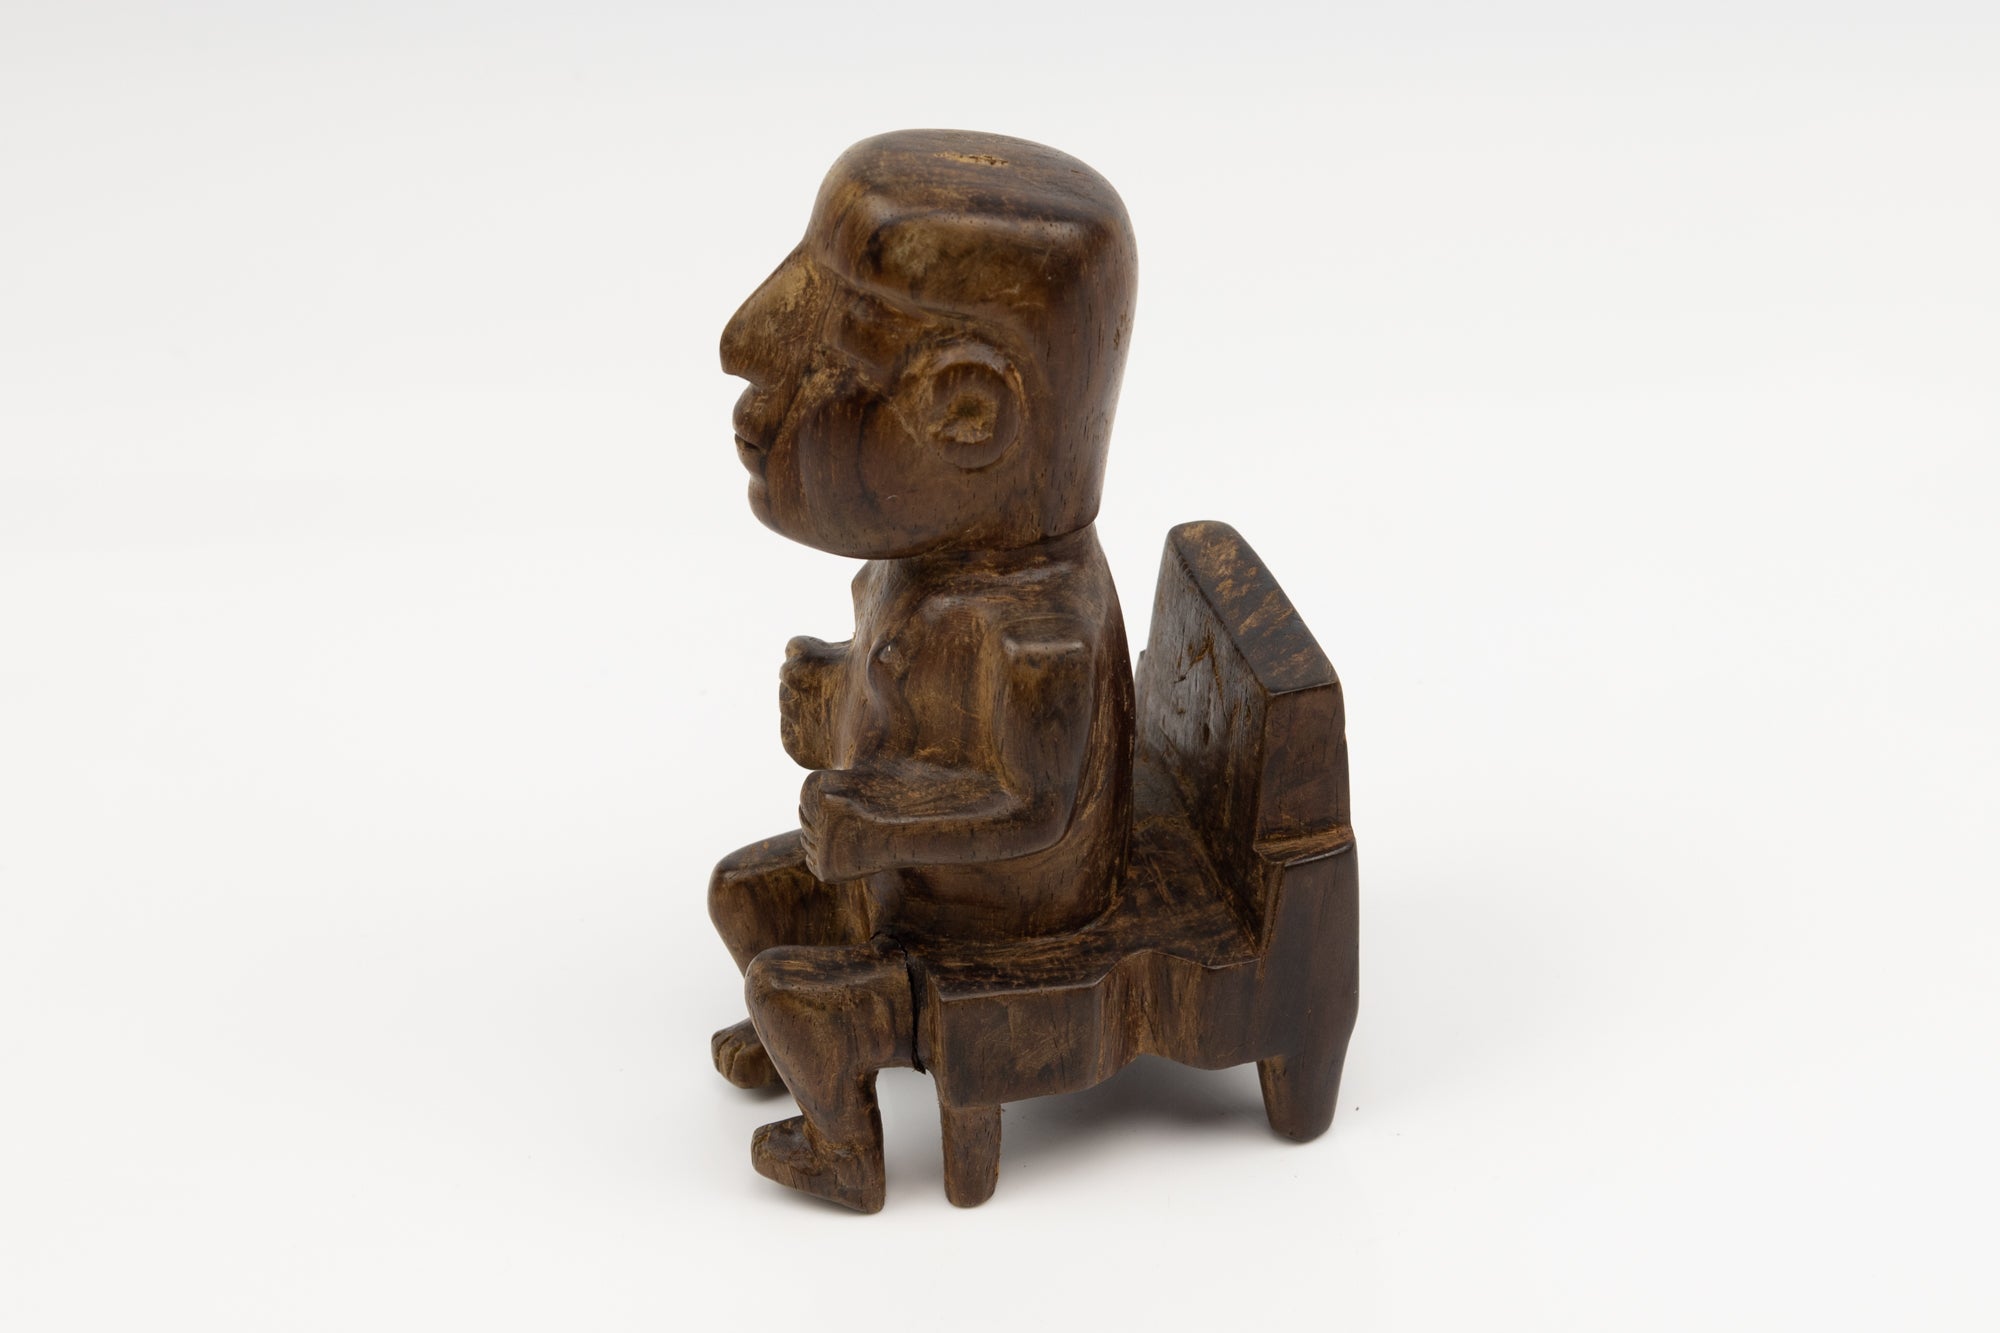 Hand Carved Cocobolo Wood Figure in Chair Sculpture